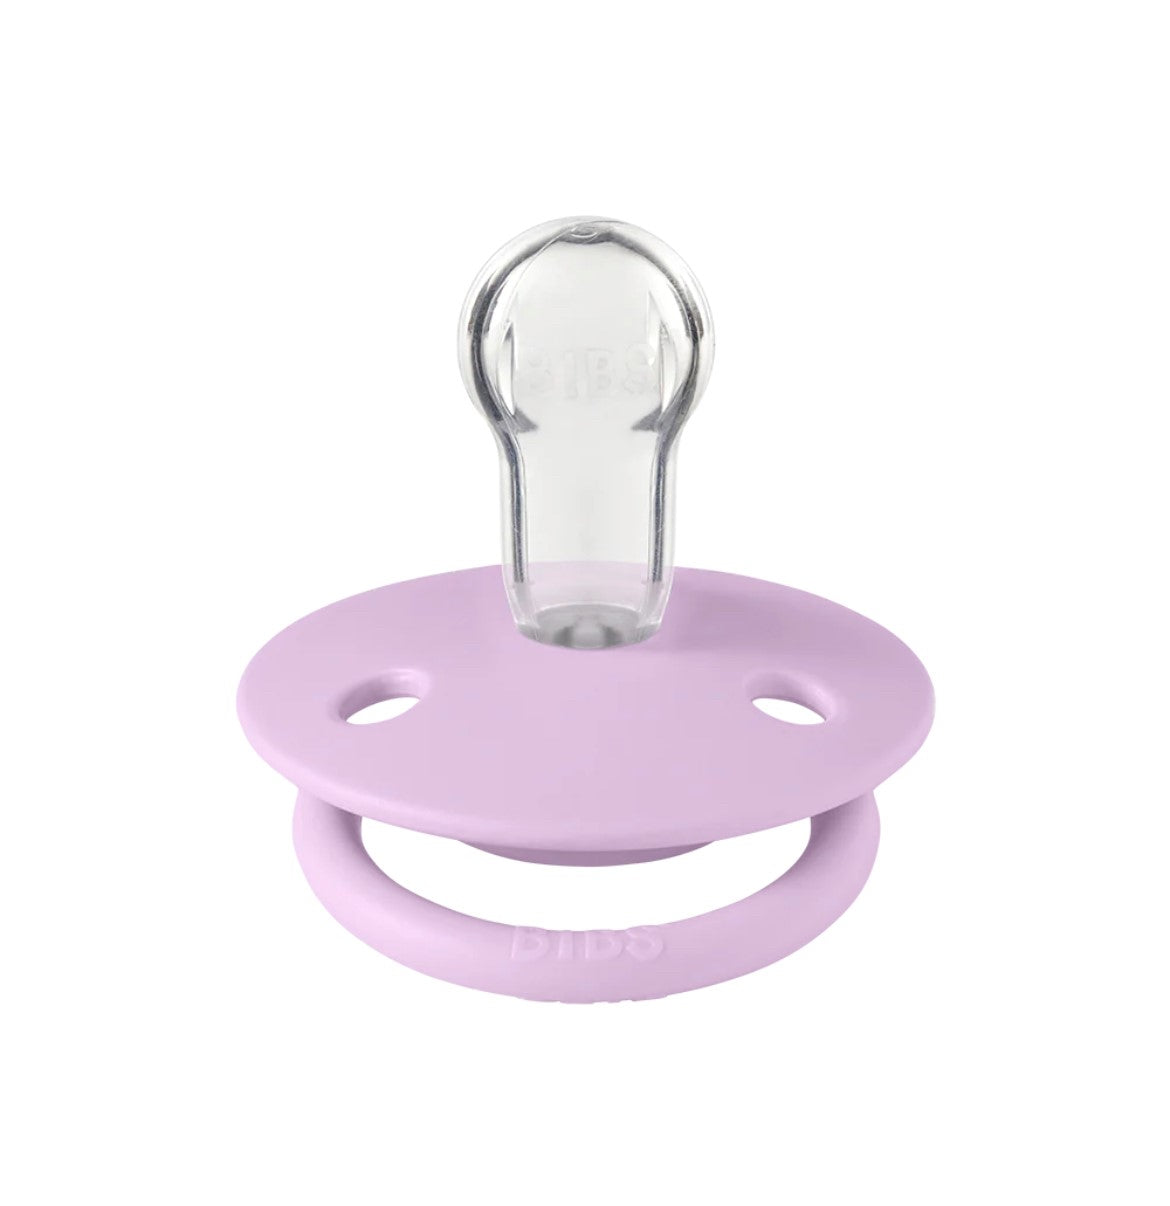 BIBs Violet Sky De Lux | Silicone Teat | Special Price | End of Stock